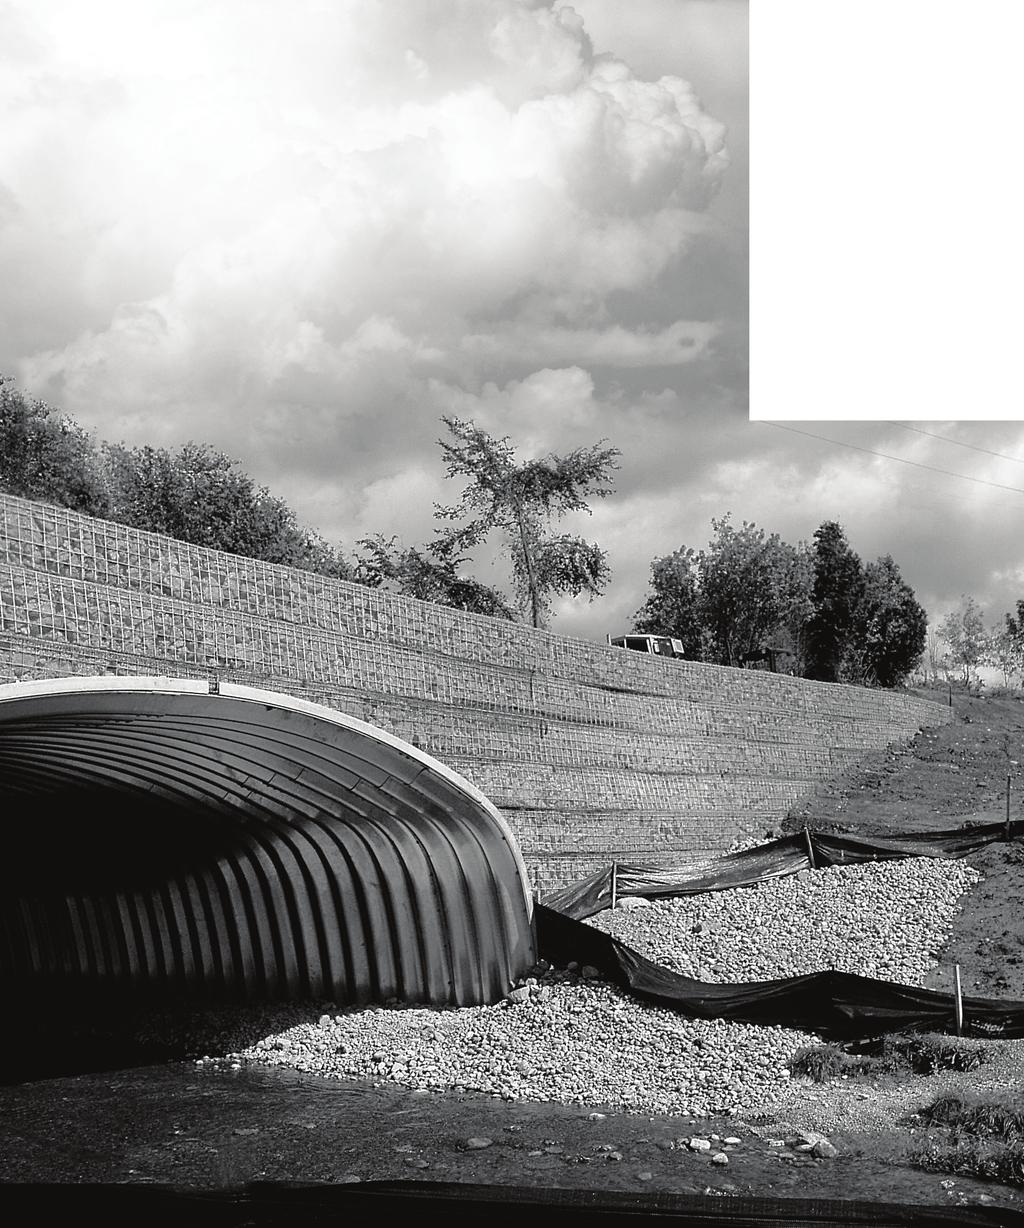 DRAINAGE SOLUTIONS SINCE 1908 MECHANICALLY STABILIZED EARTH (MSE) WALL SYSTEMS